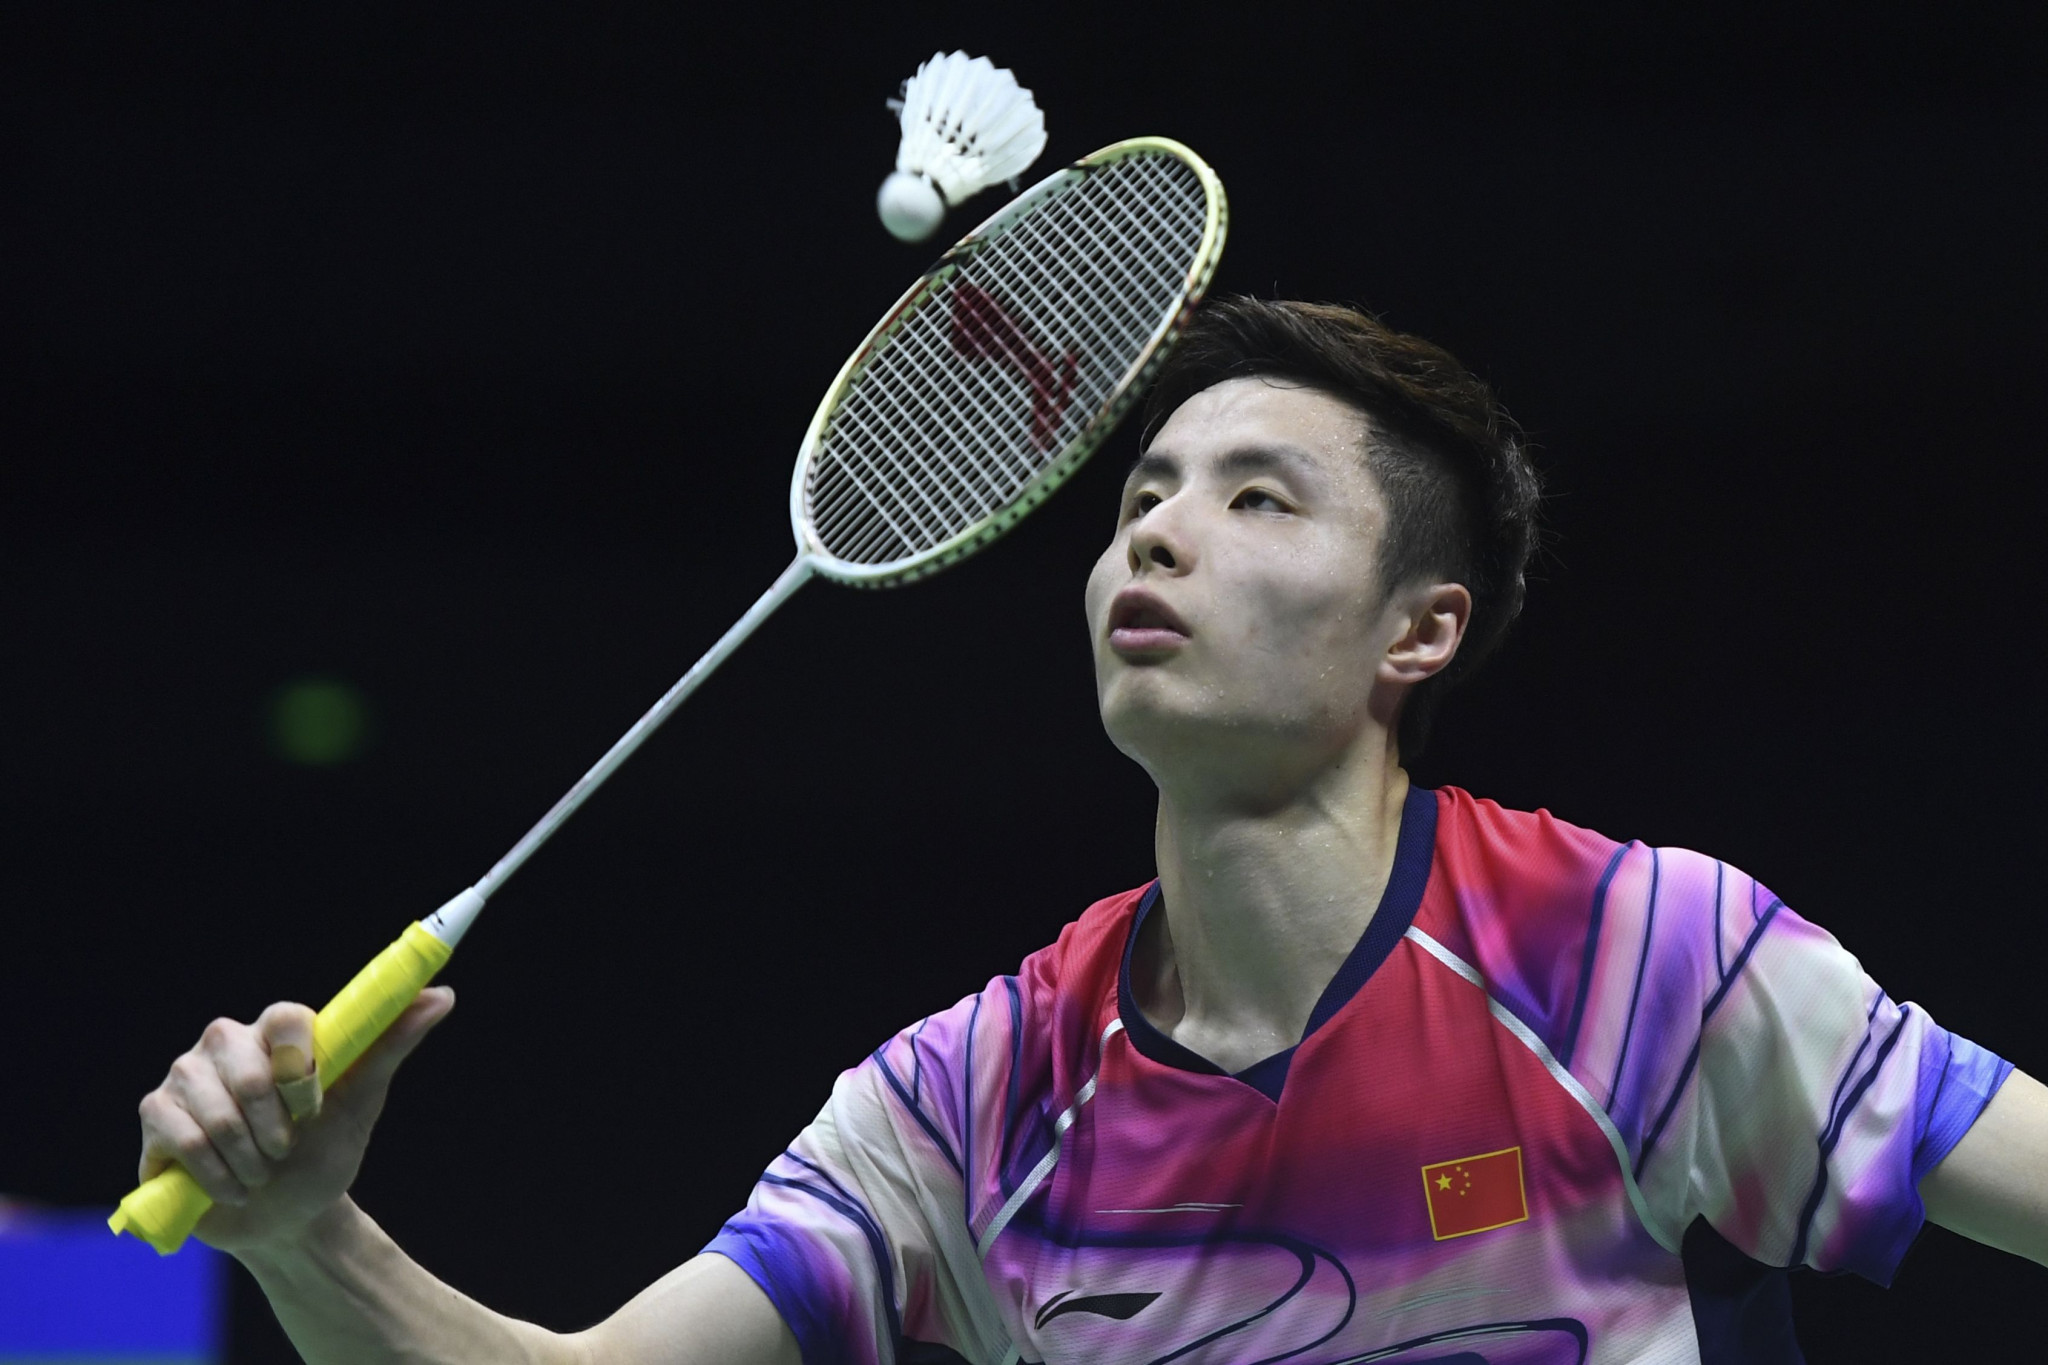 Second seed Shi battles back to advance at BWF Indonesia Open